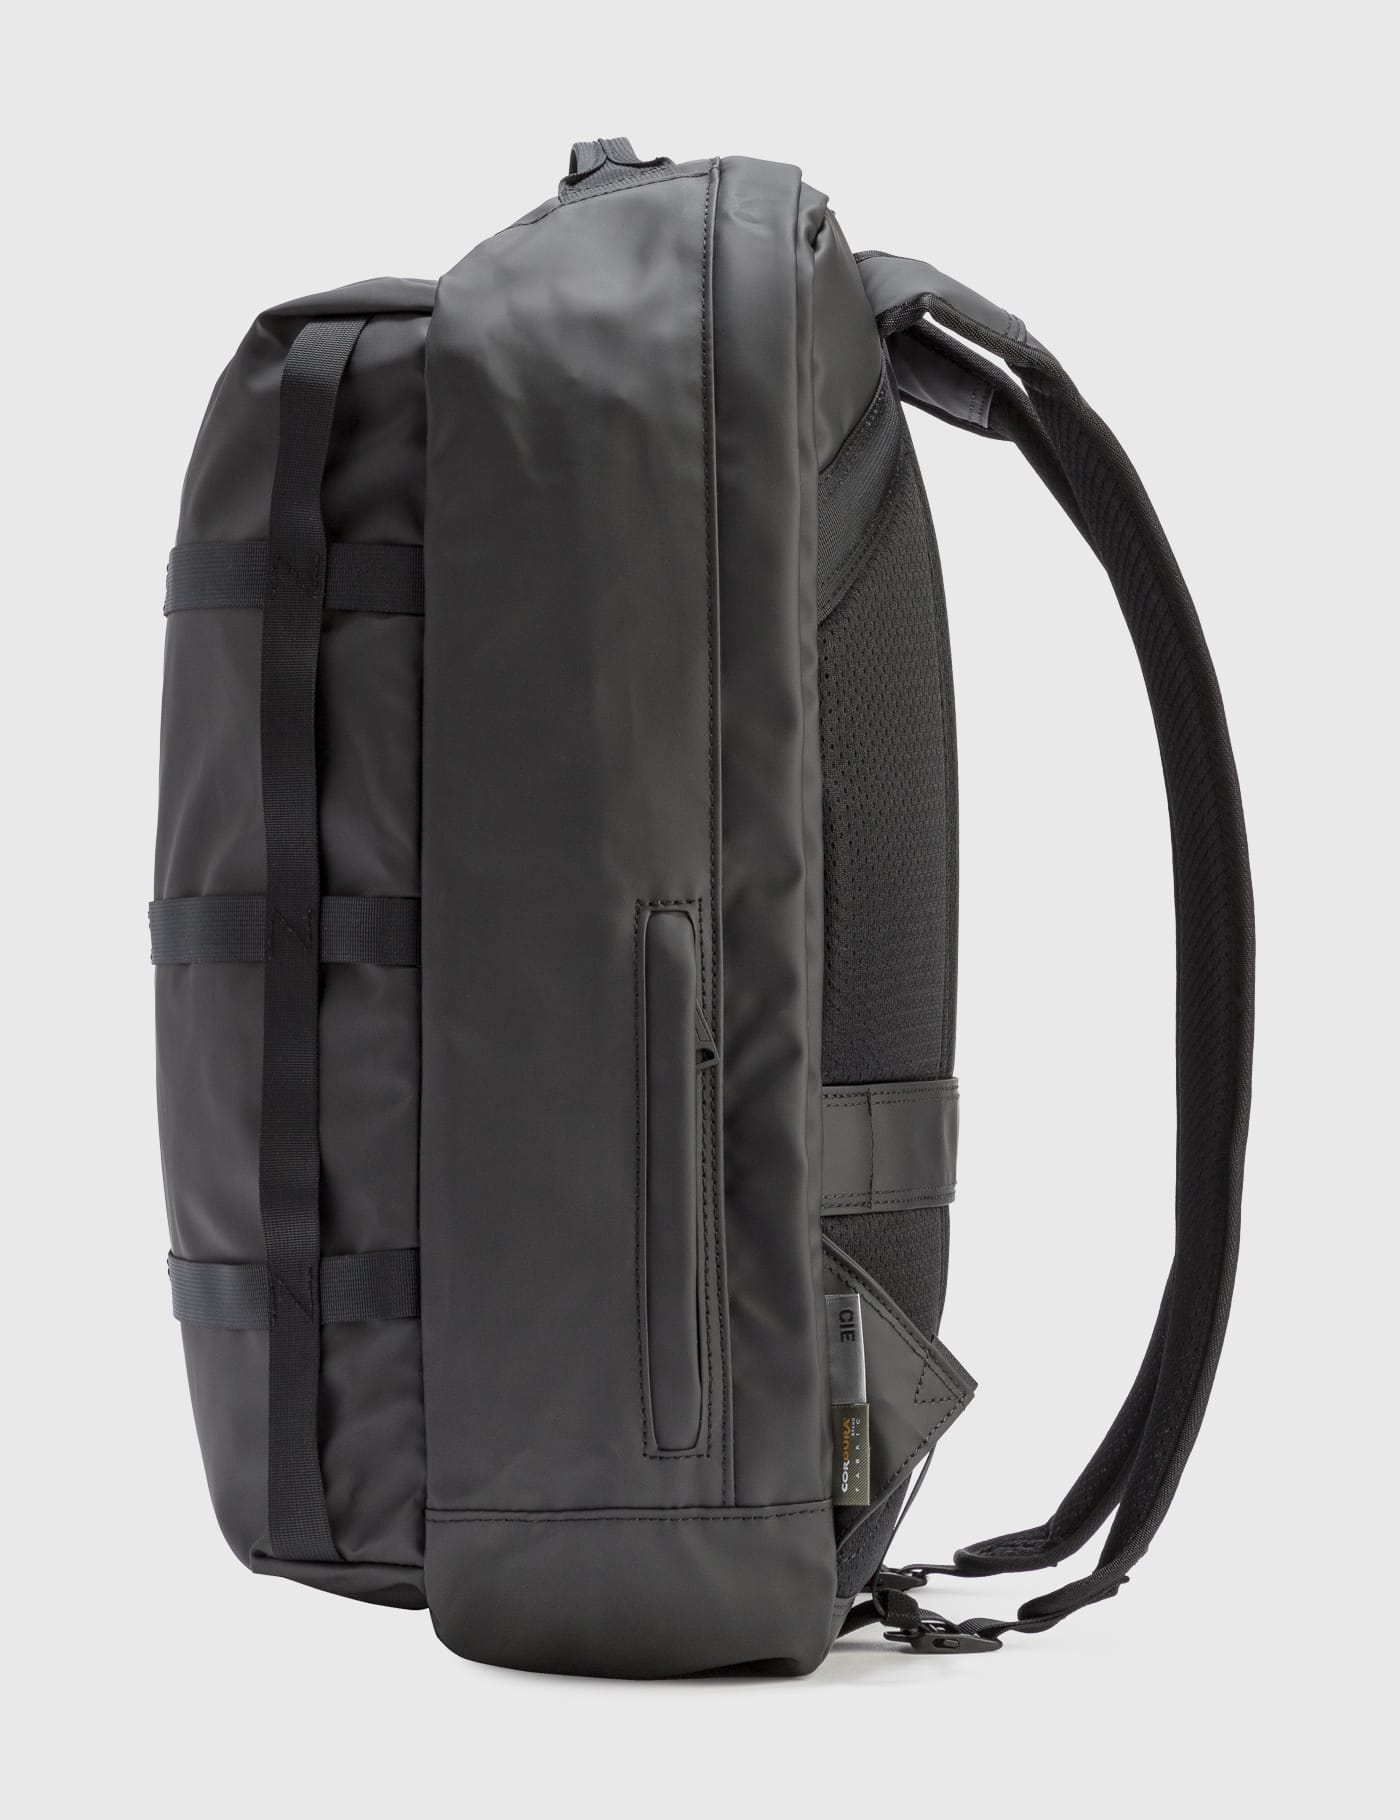 CIE - Grid 3 2-way Backpack | HBX - Globally Curated Fashion and